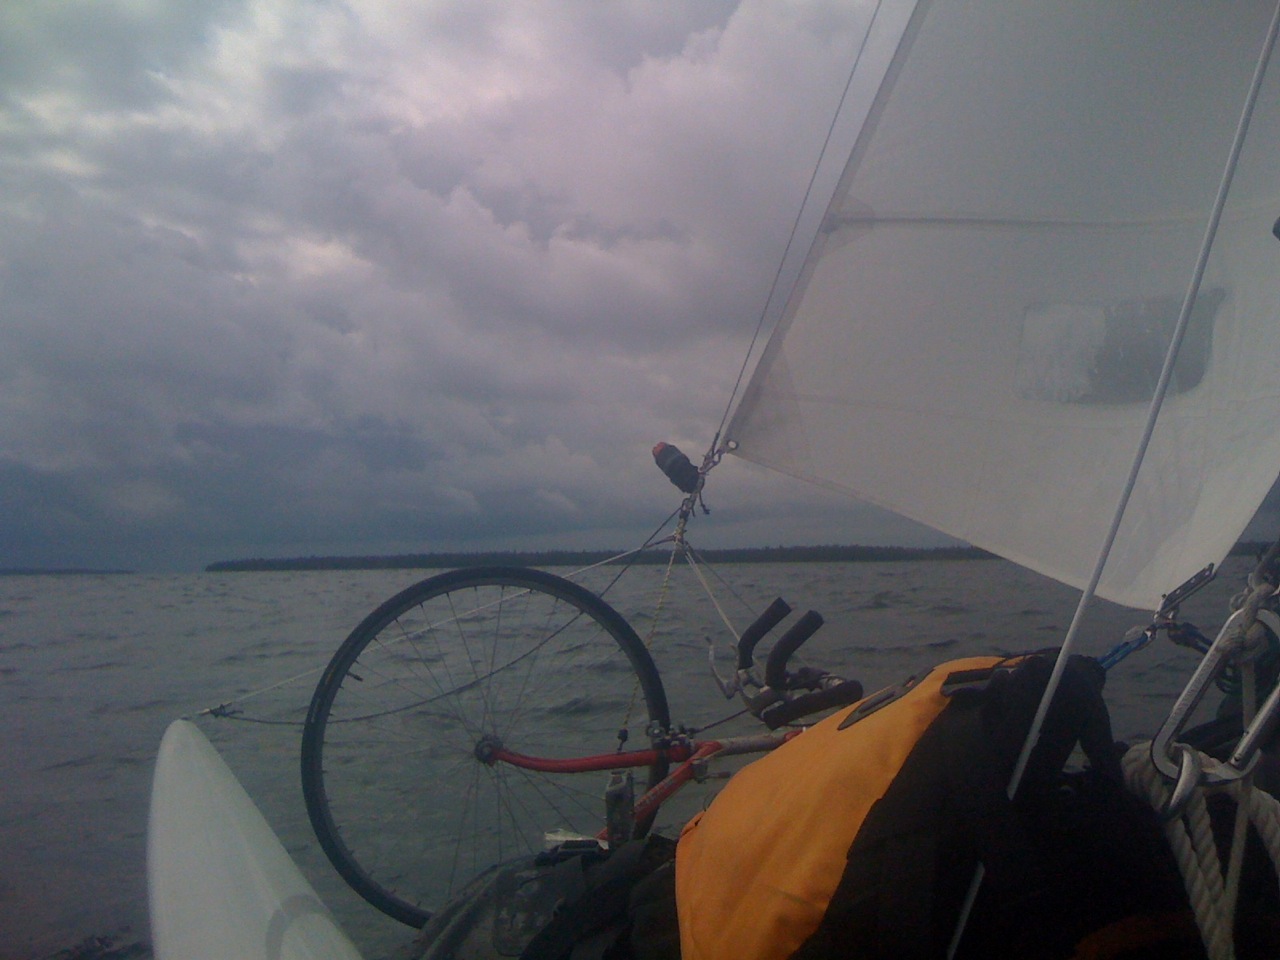 An ominous sky as I approach the Summer Islands and the crossing of the BIg Bay du Noc